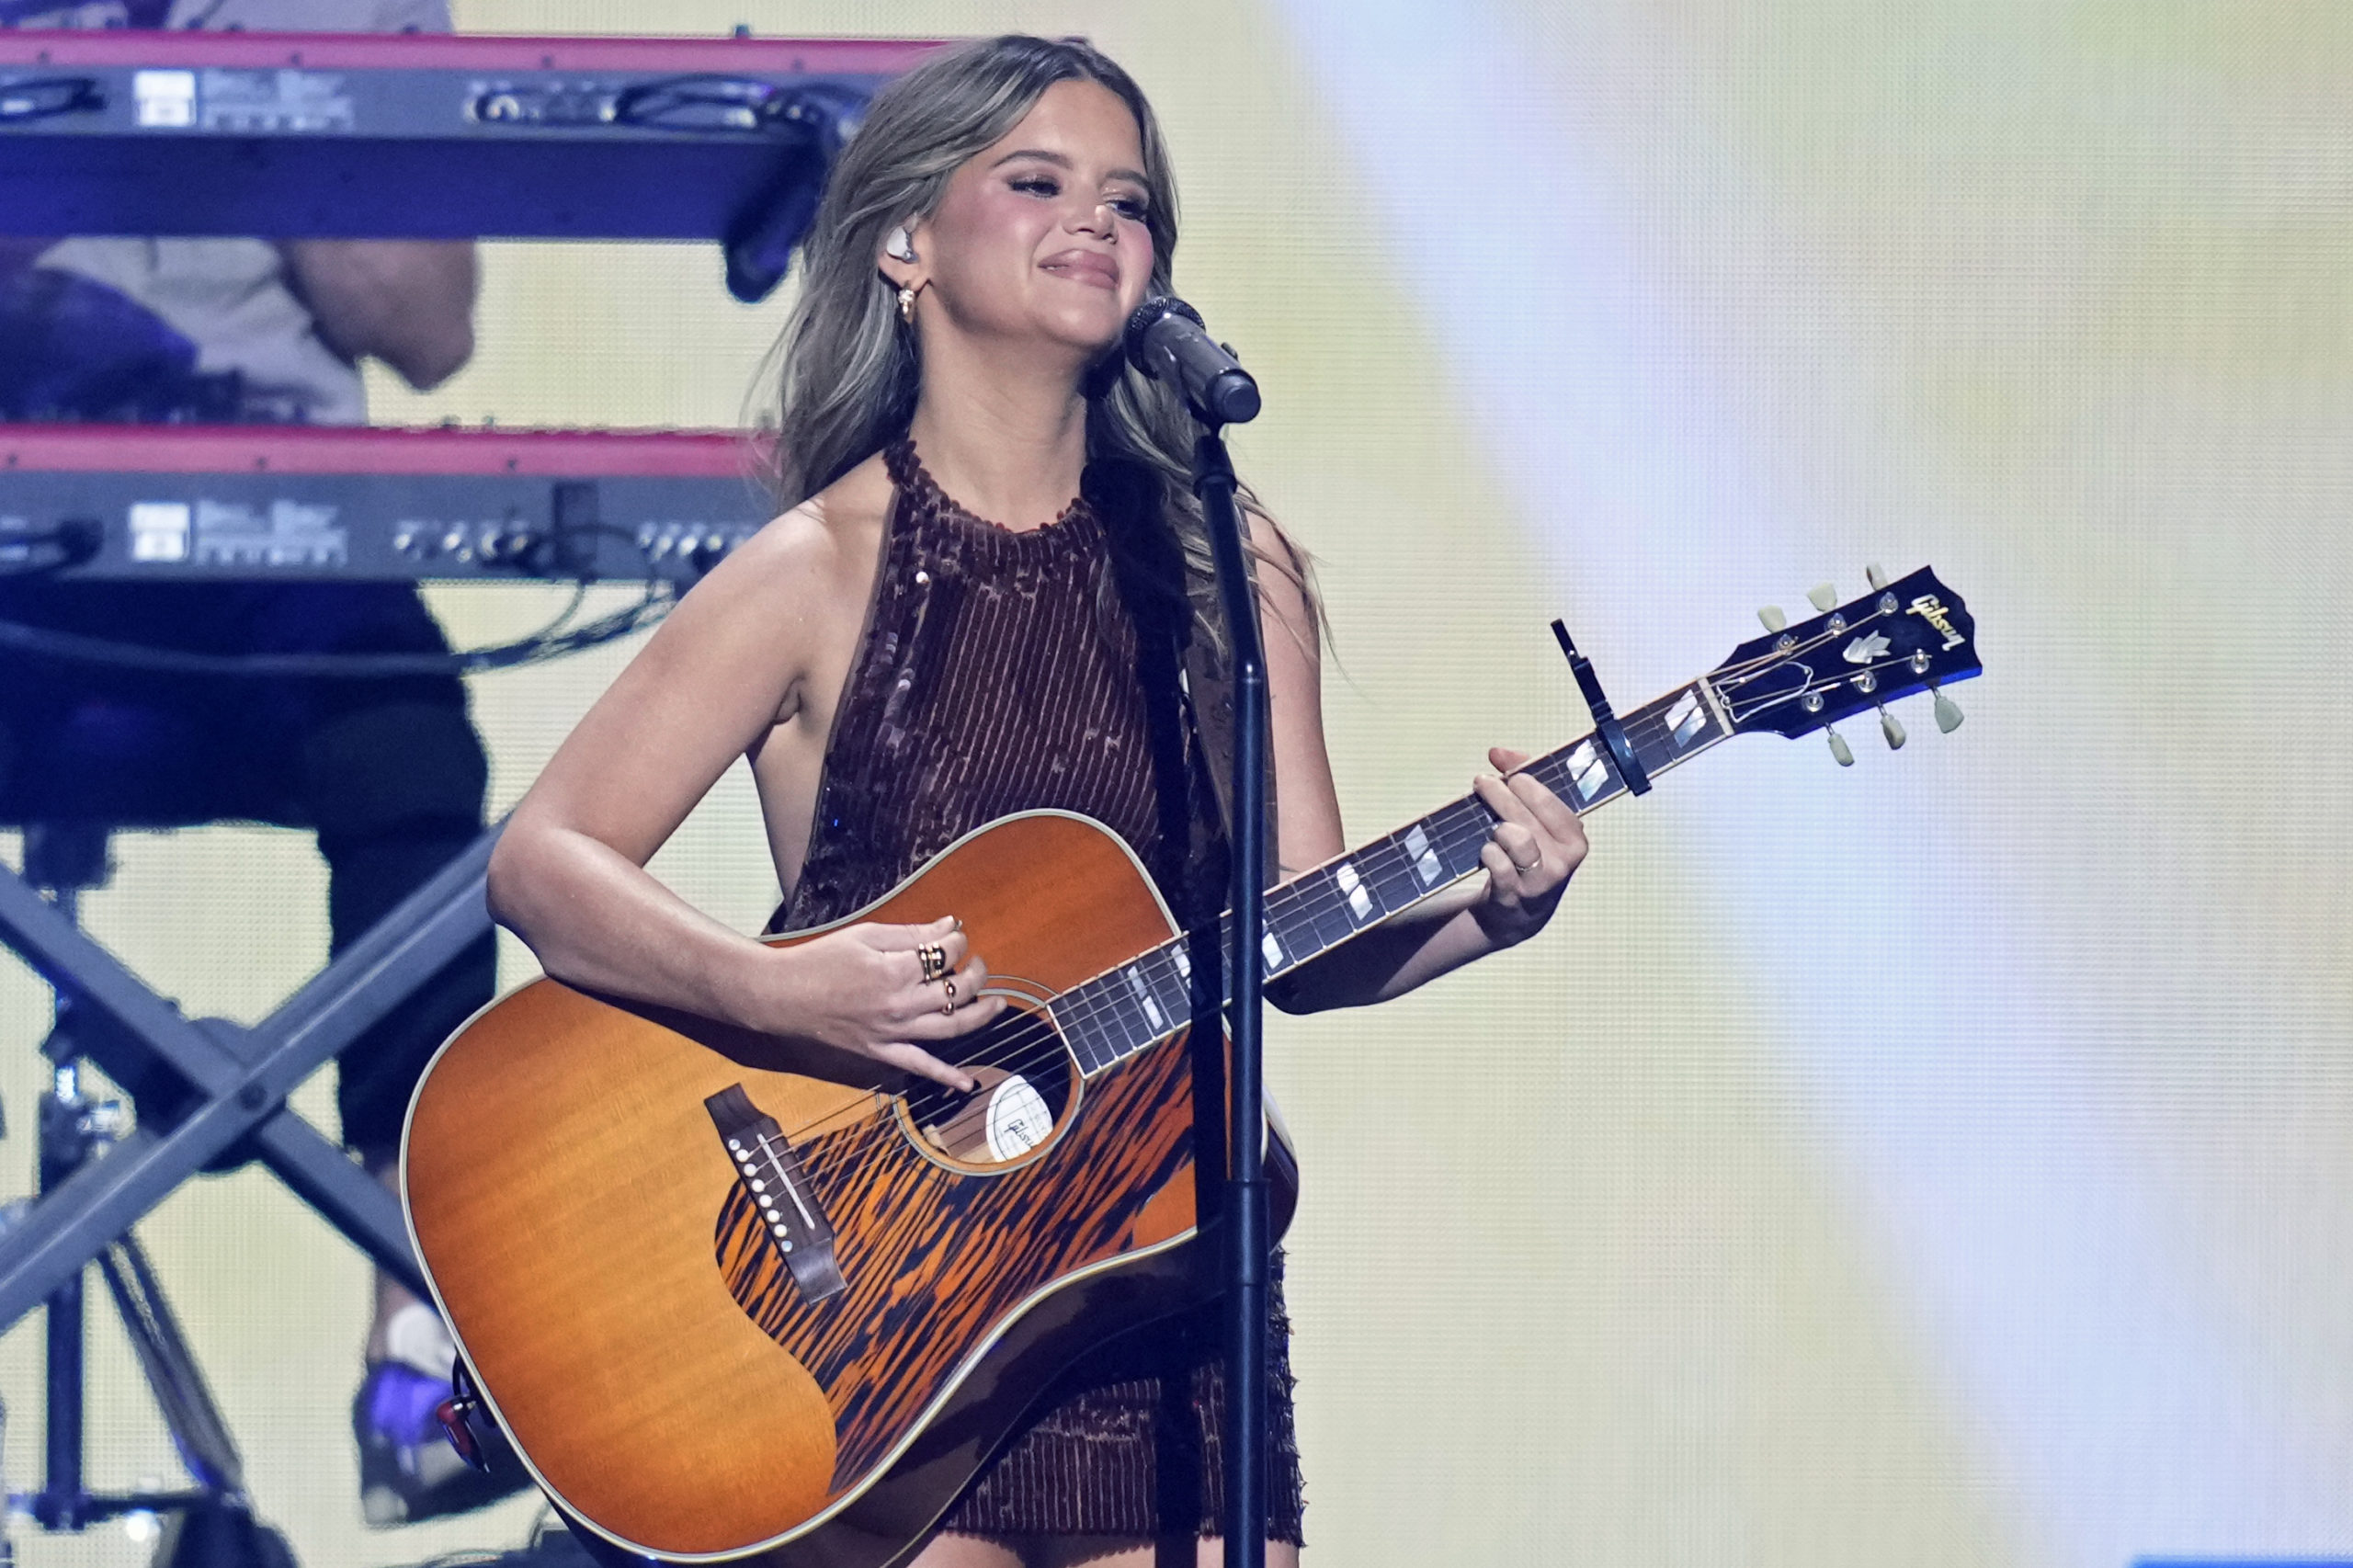 Maren Morris smiles as she sings and plays a guitar at a micrphone. She's wearing a sleeveless black dress.